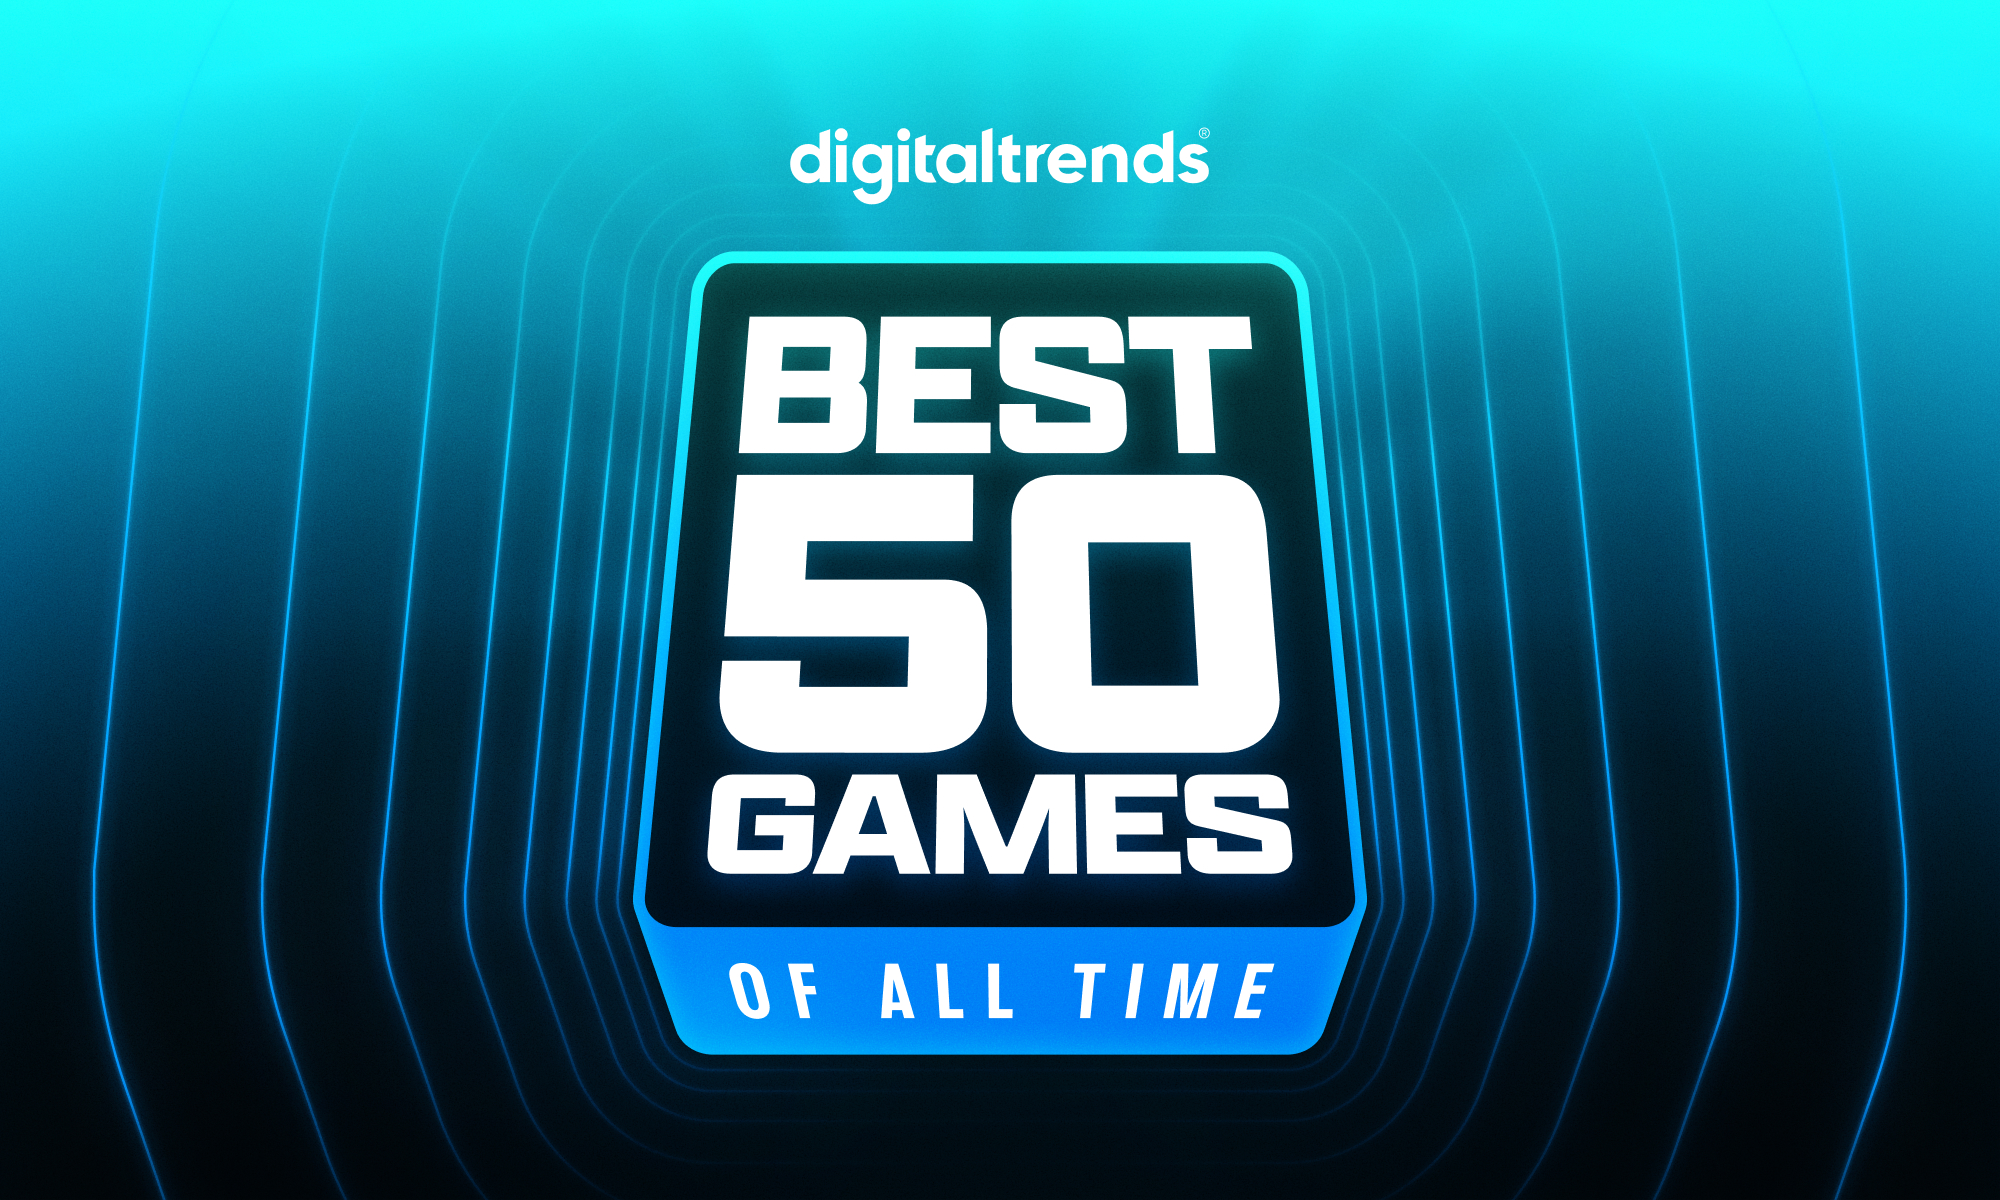 The 50 best video games of all time